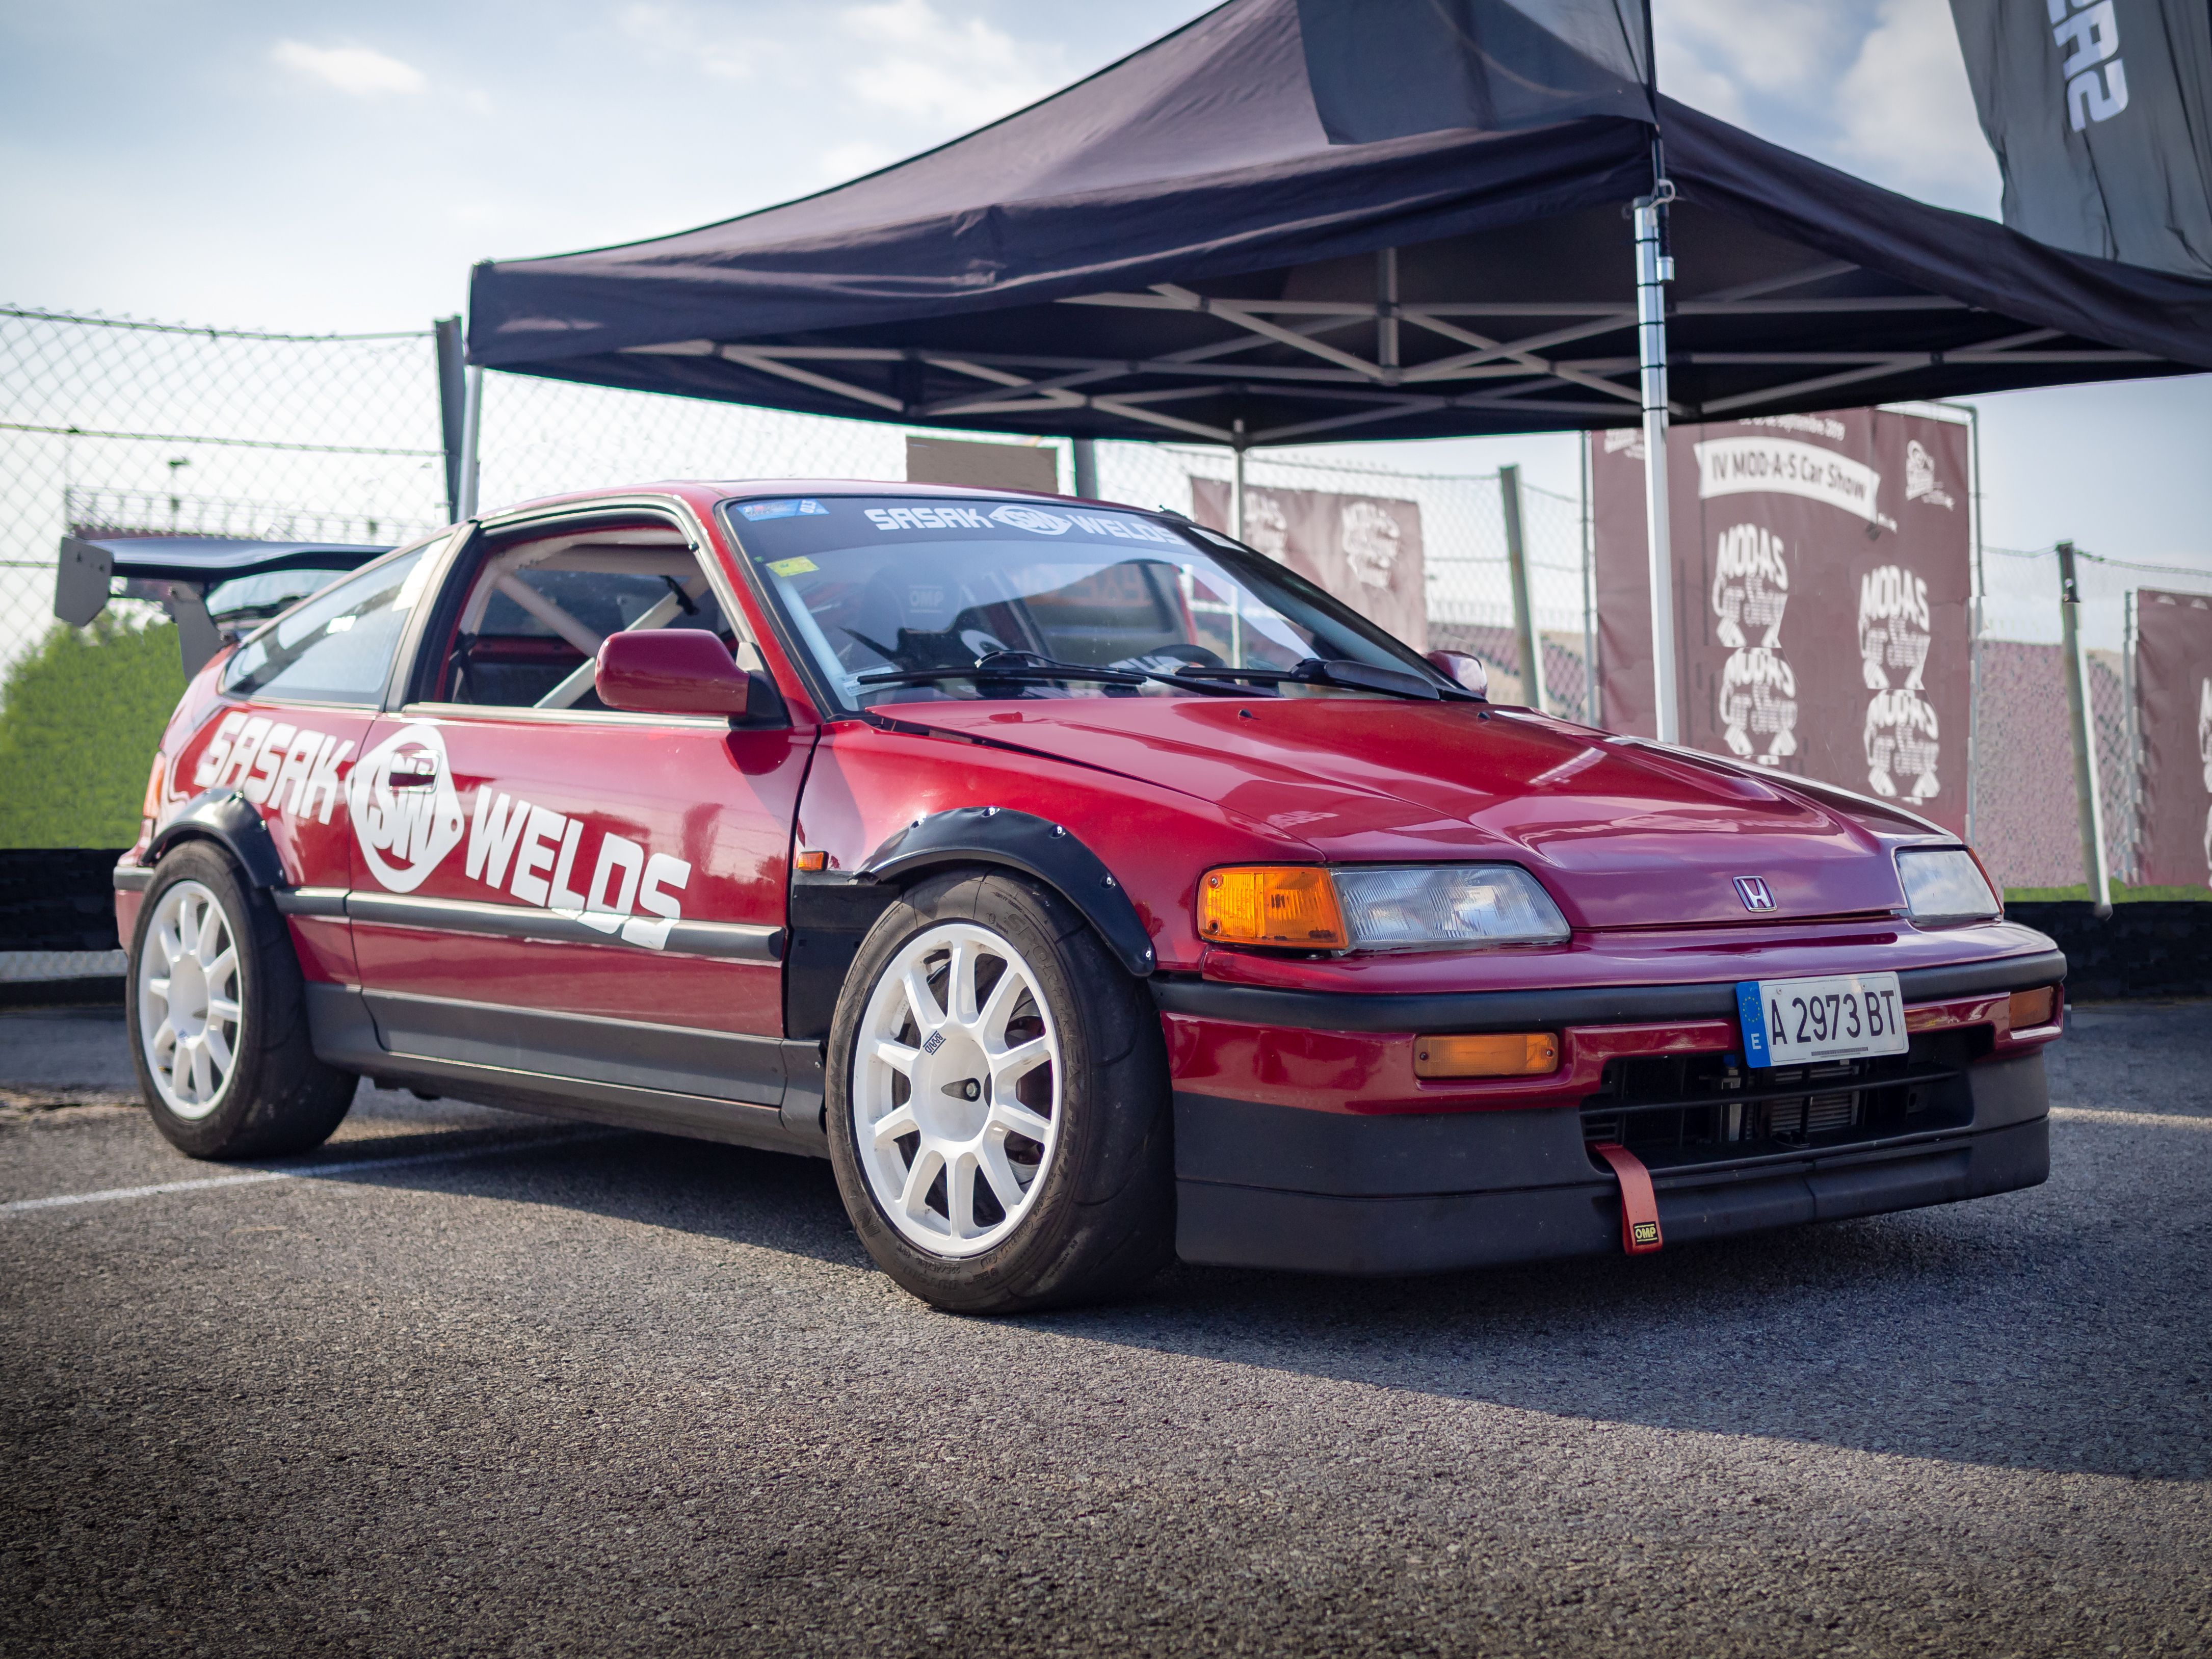 Red Honds CRX